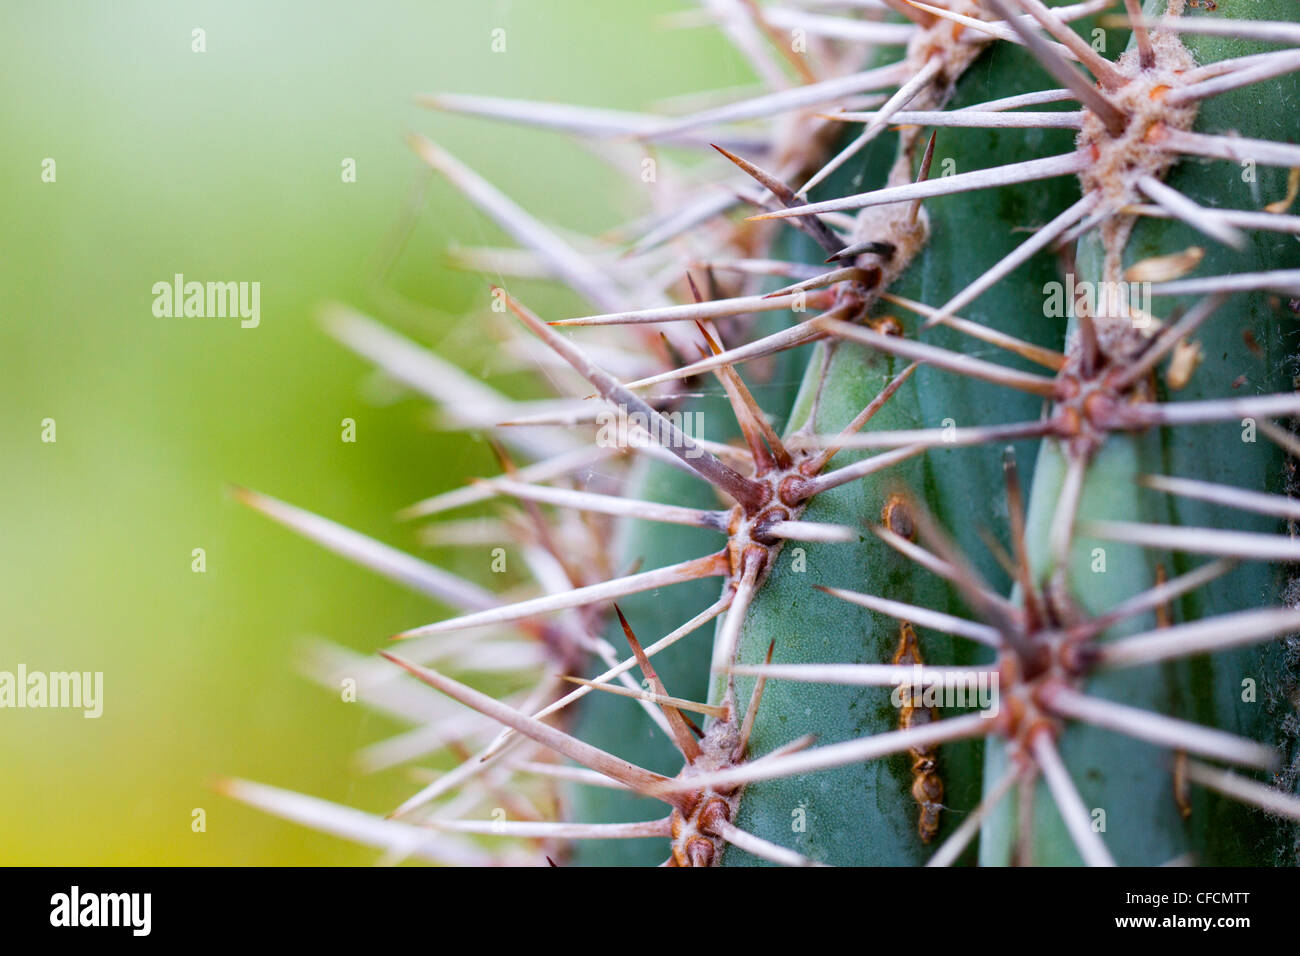 Cactus Spines; close up Stock Photo